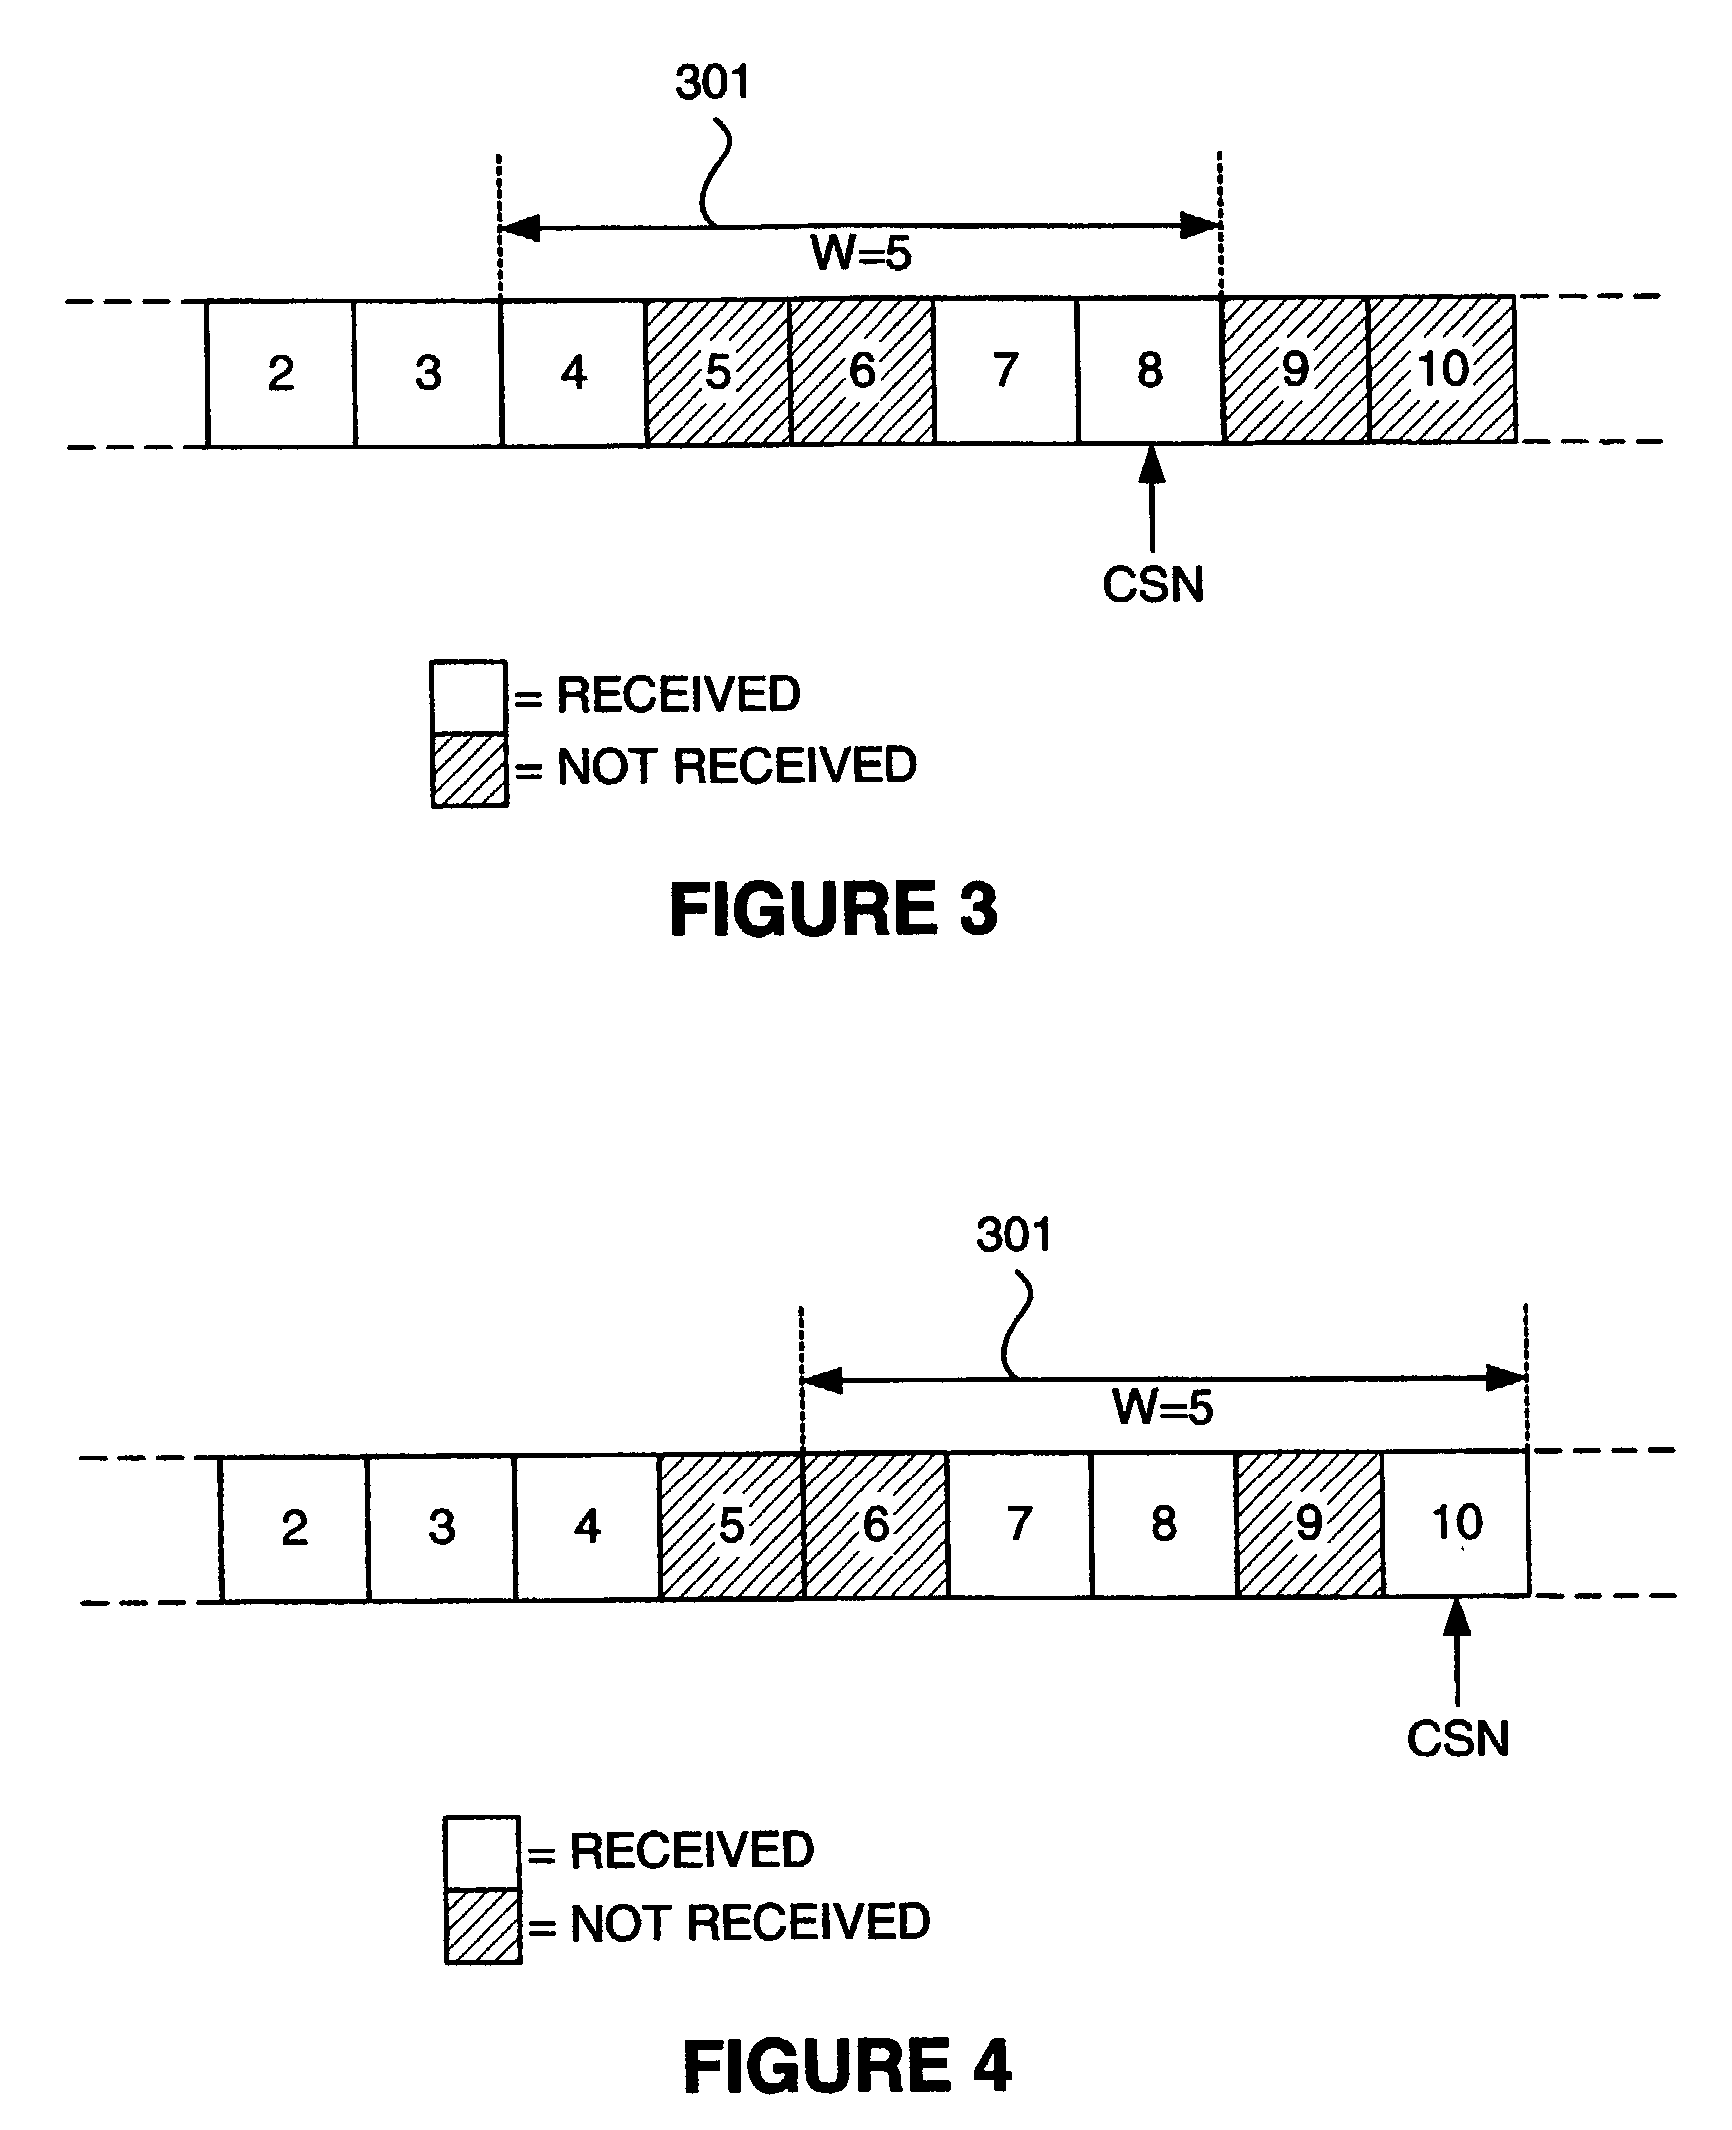 Authentication of remotely originating network messages